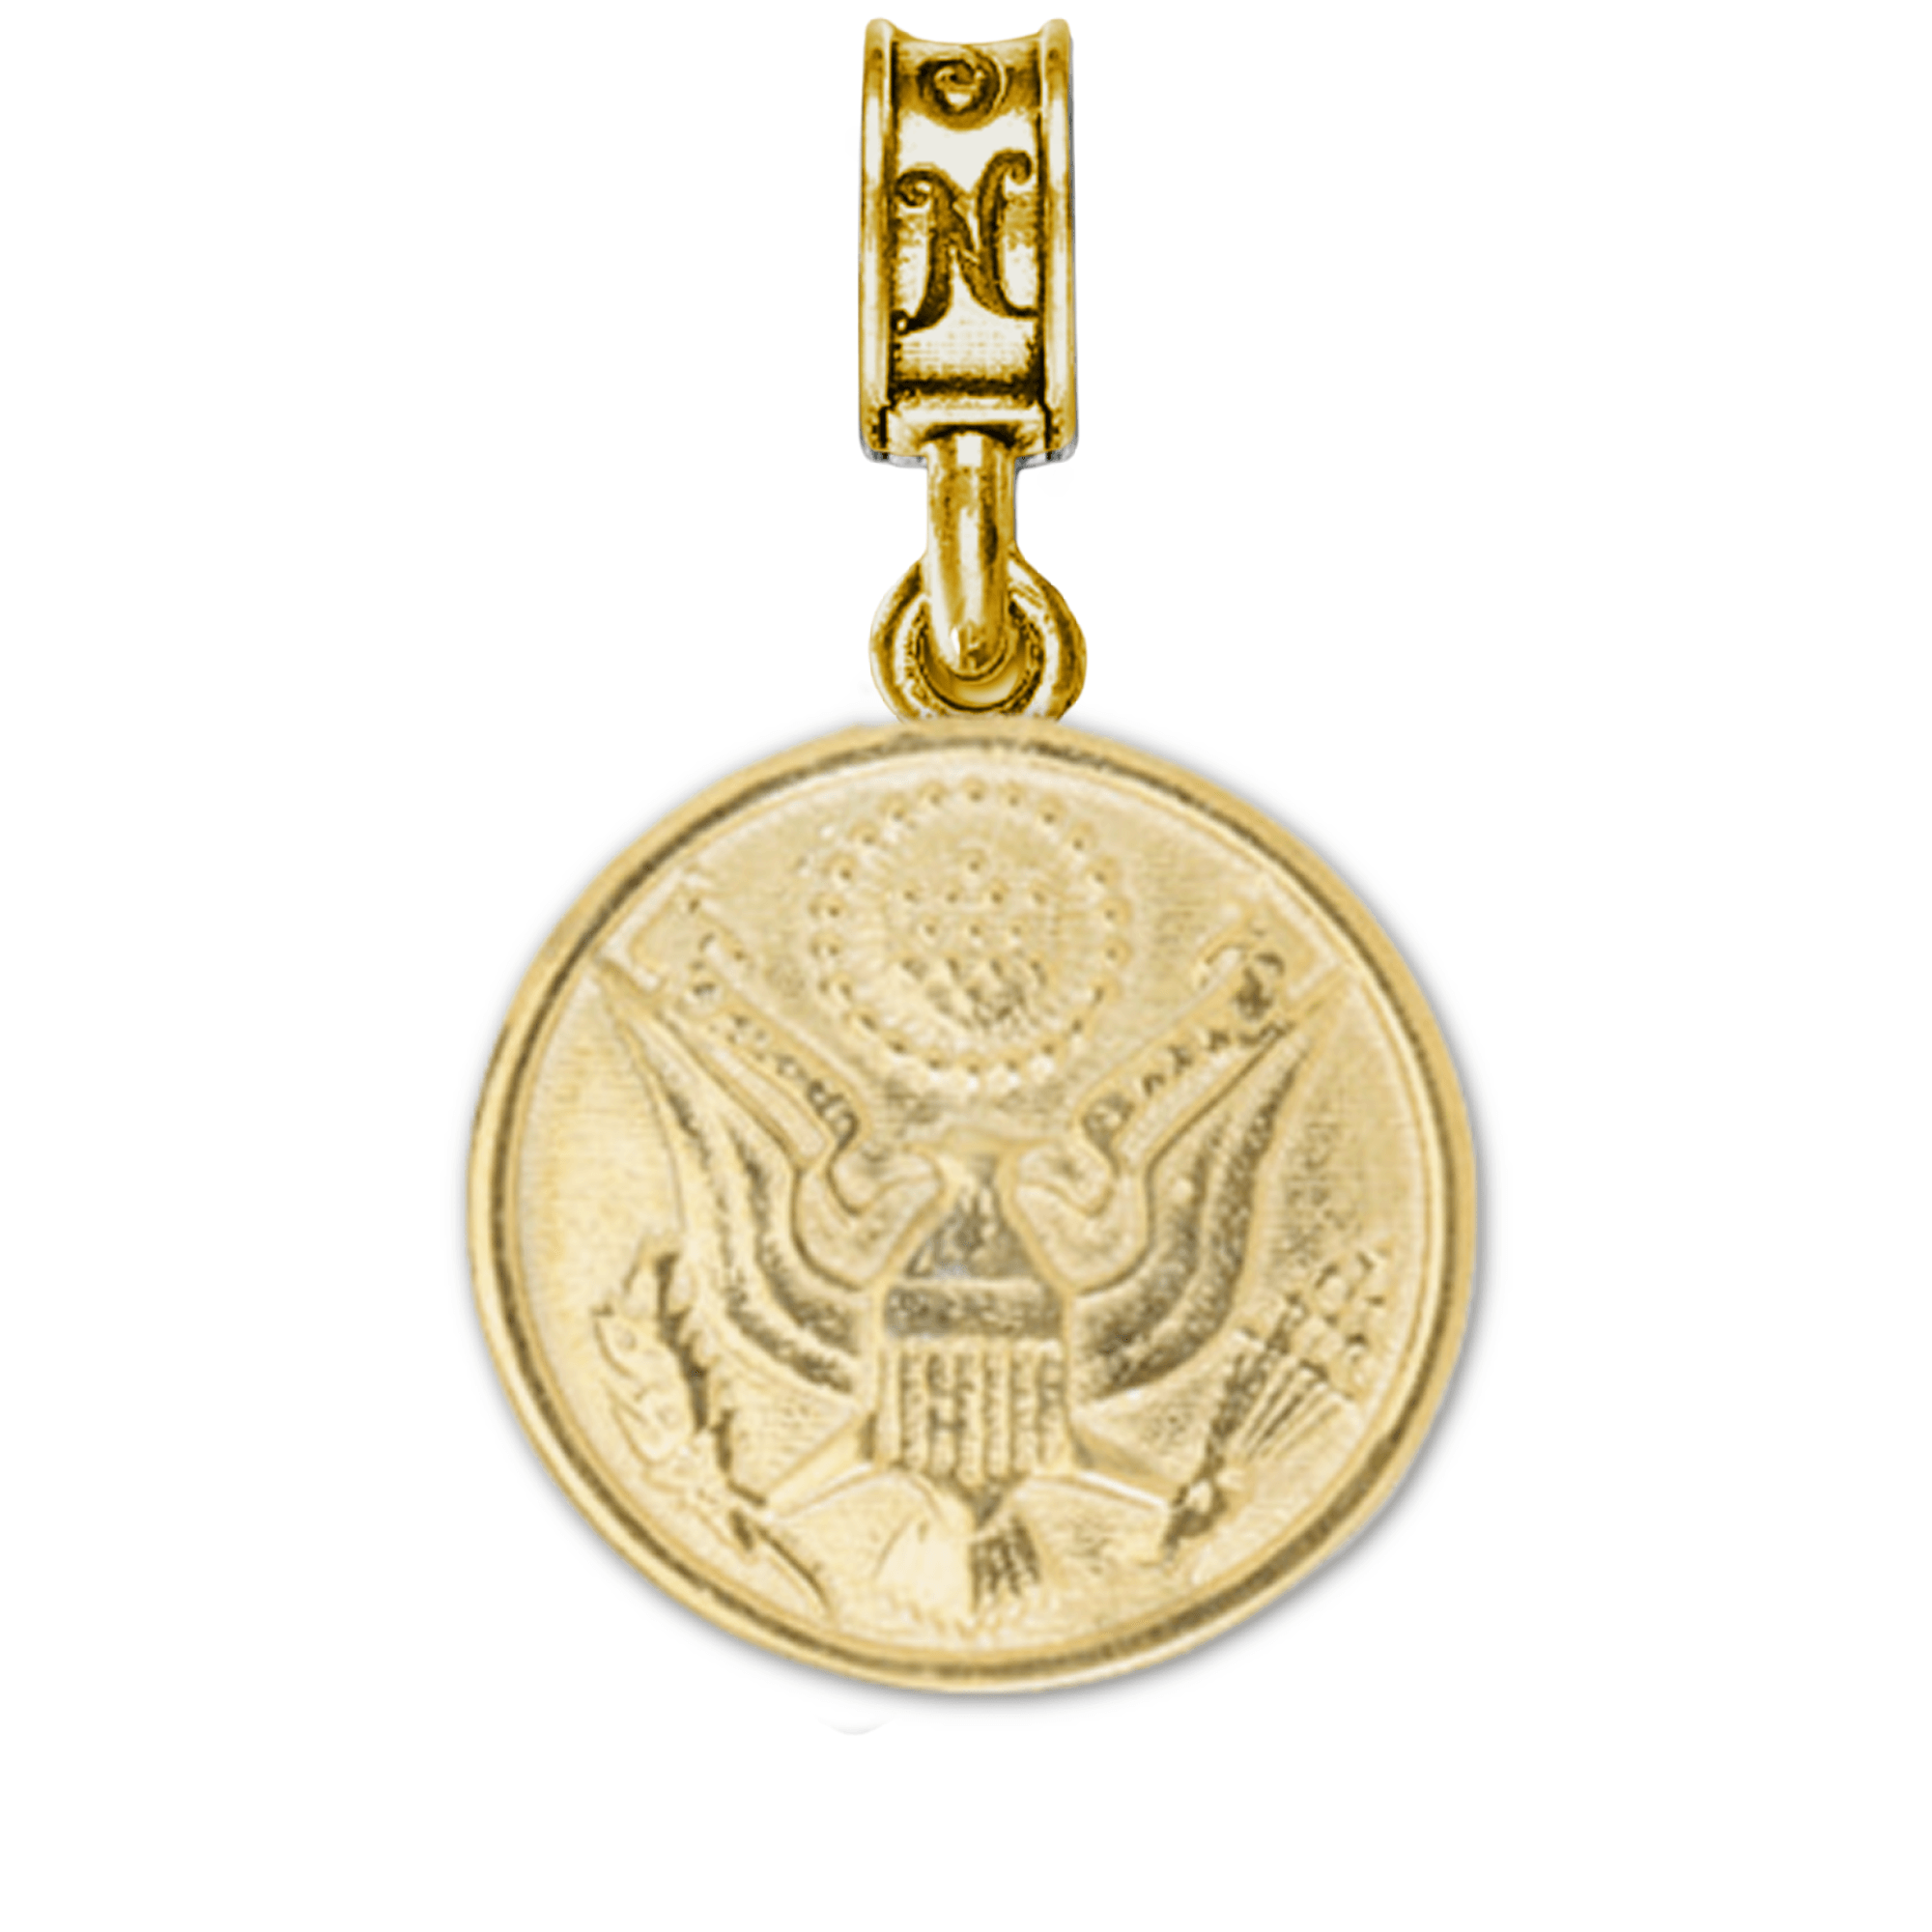 Military Jewelry, Military Charms, United States Army, Military Gifts, Charm Button Gold